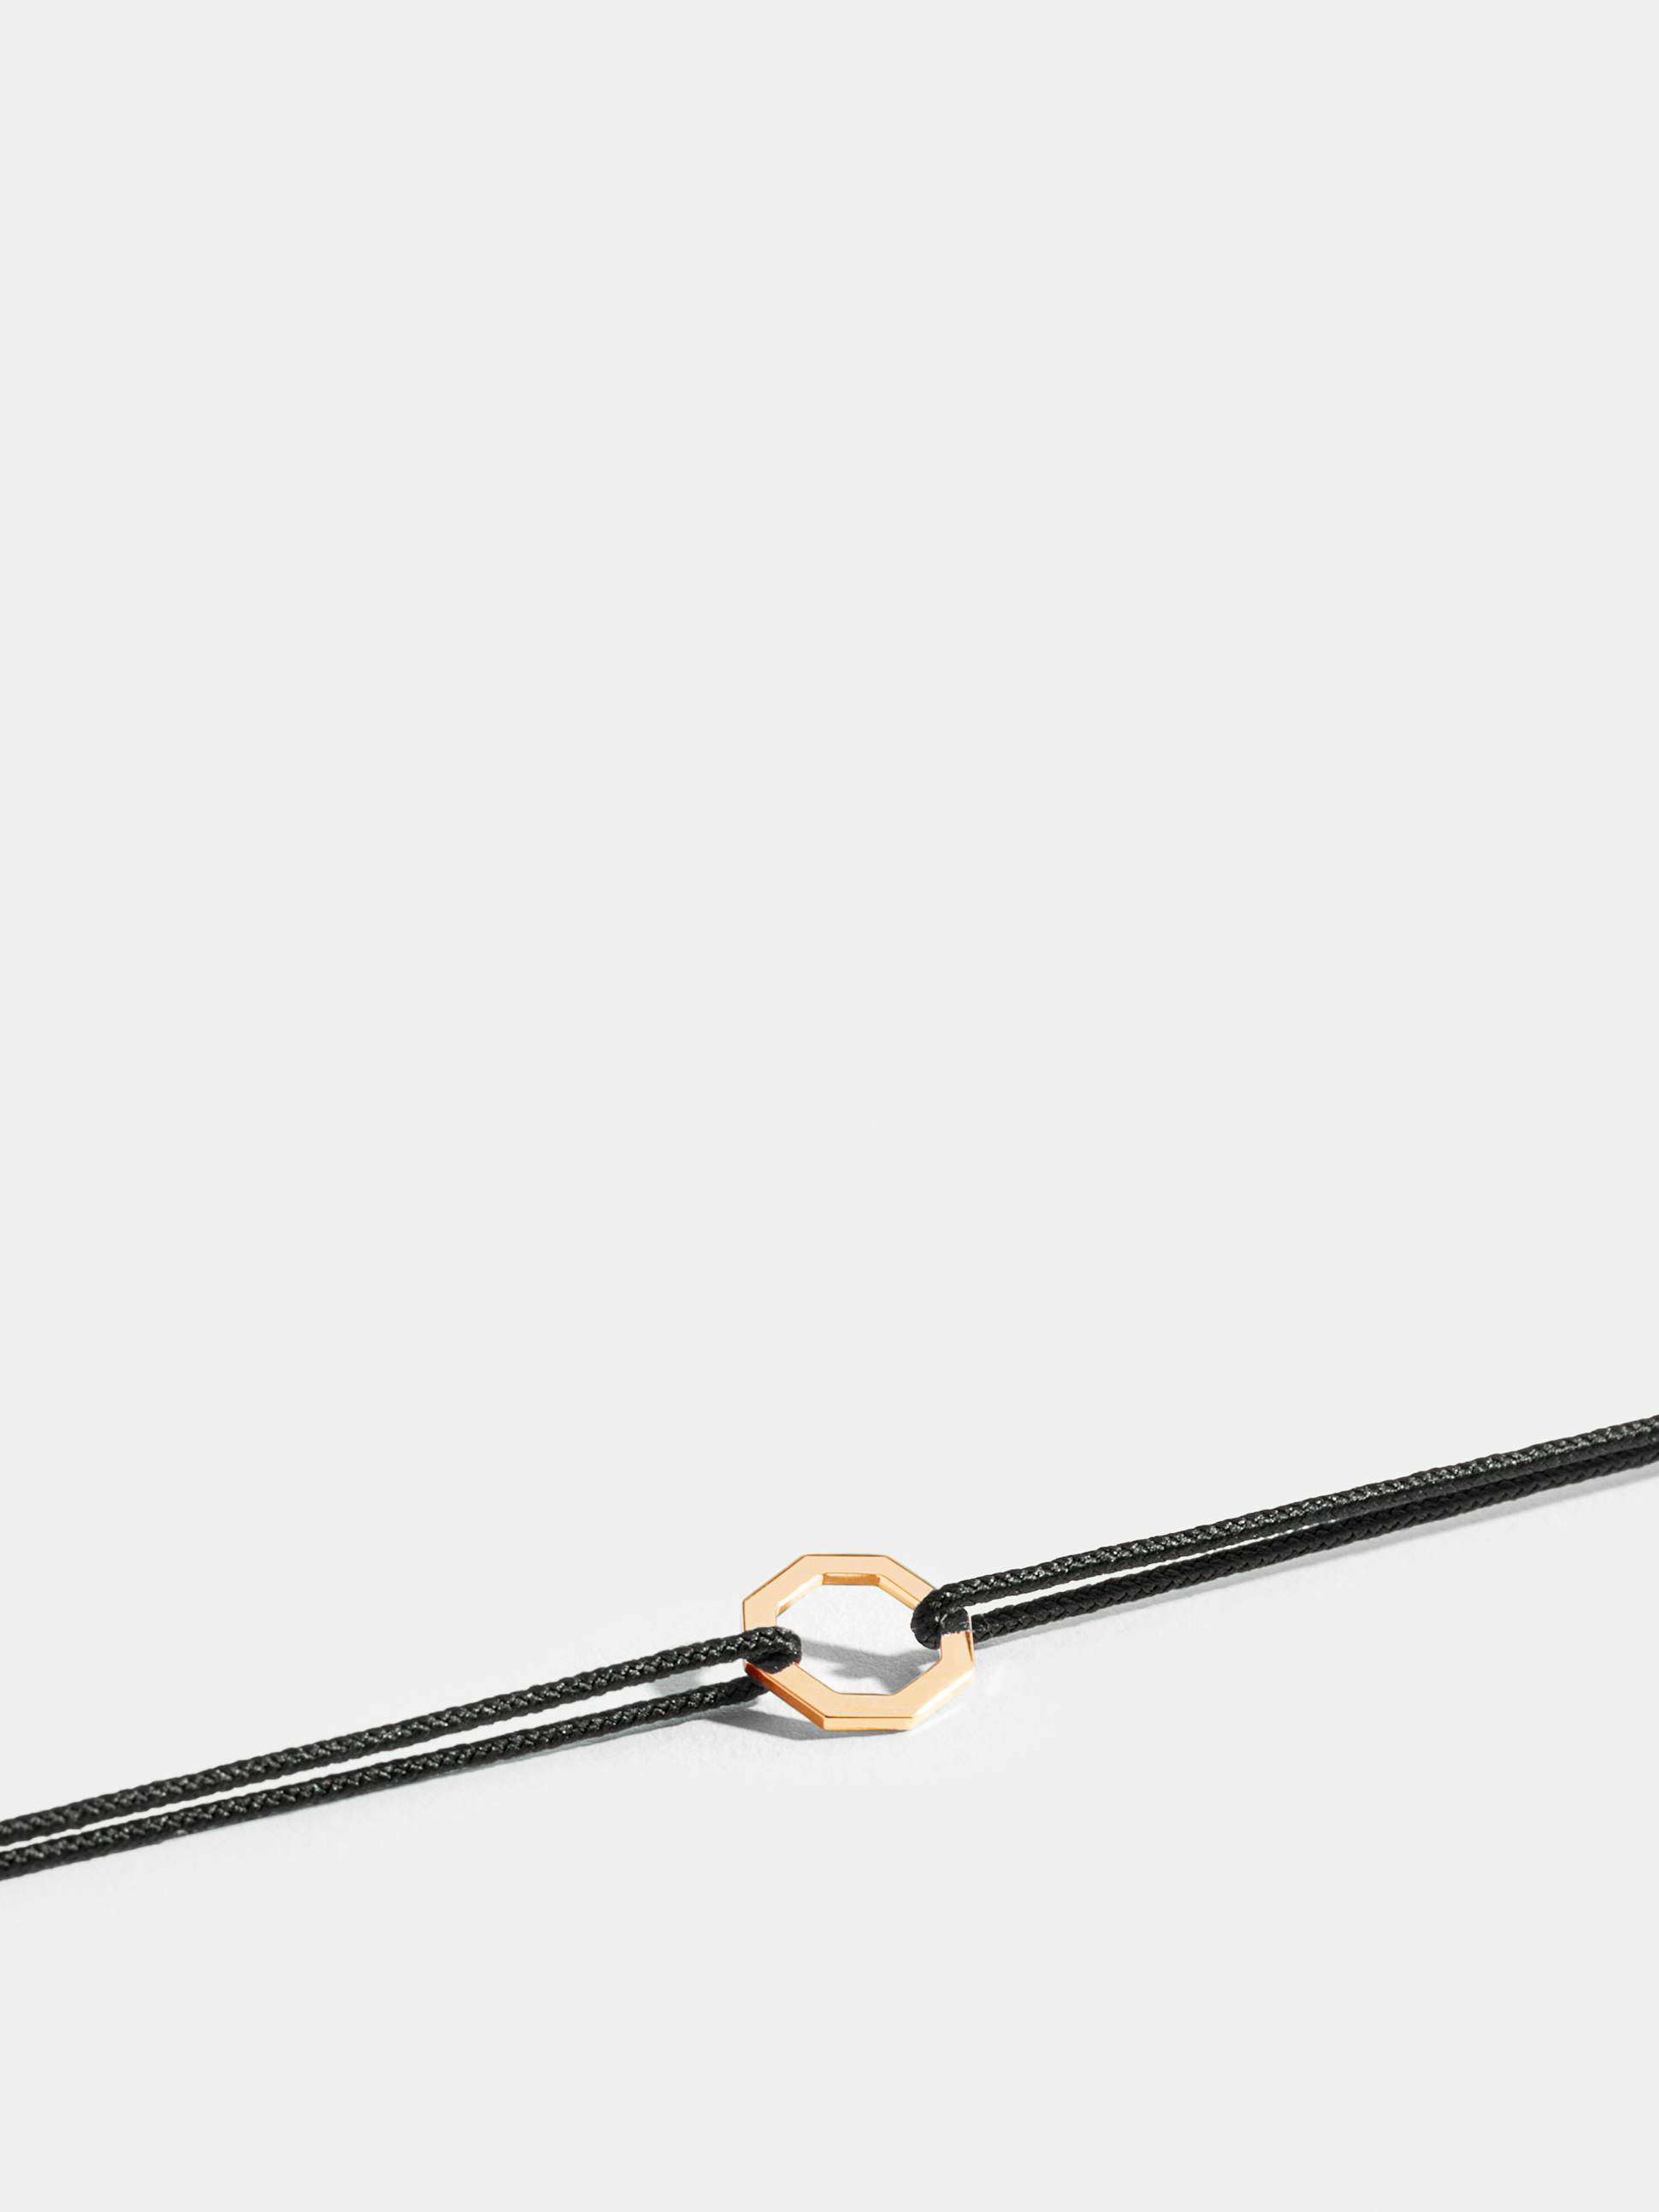 Octogone motif in 18k Fairmined ethical yellow gold, on a cord. 